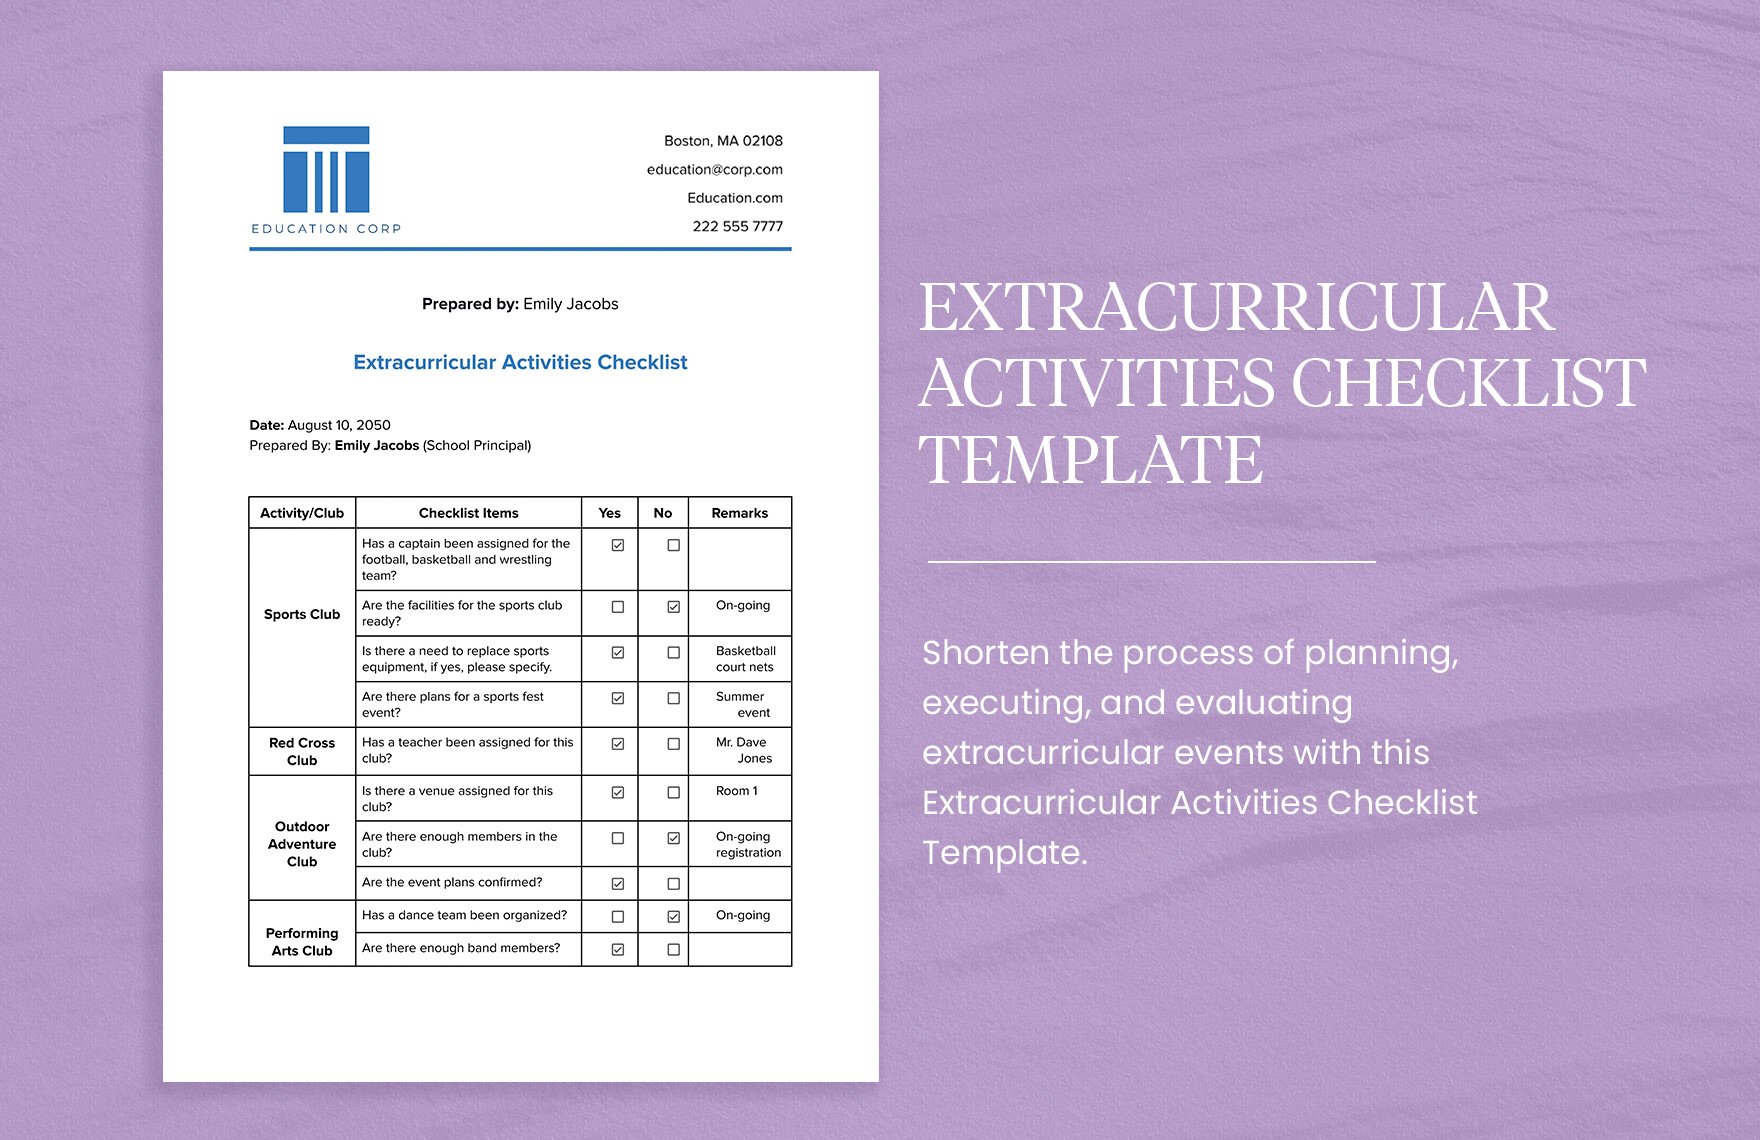 Extracurricular Activities Checklist Template in Word, Google Docs, PDF